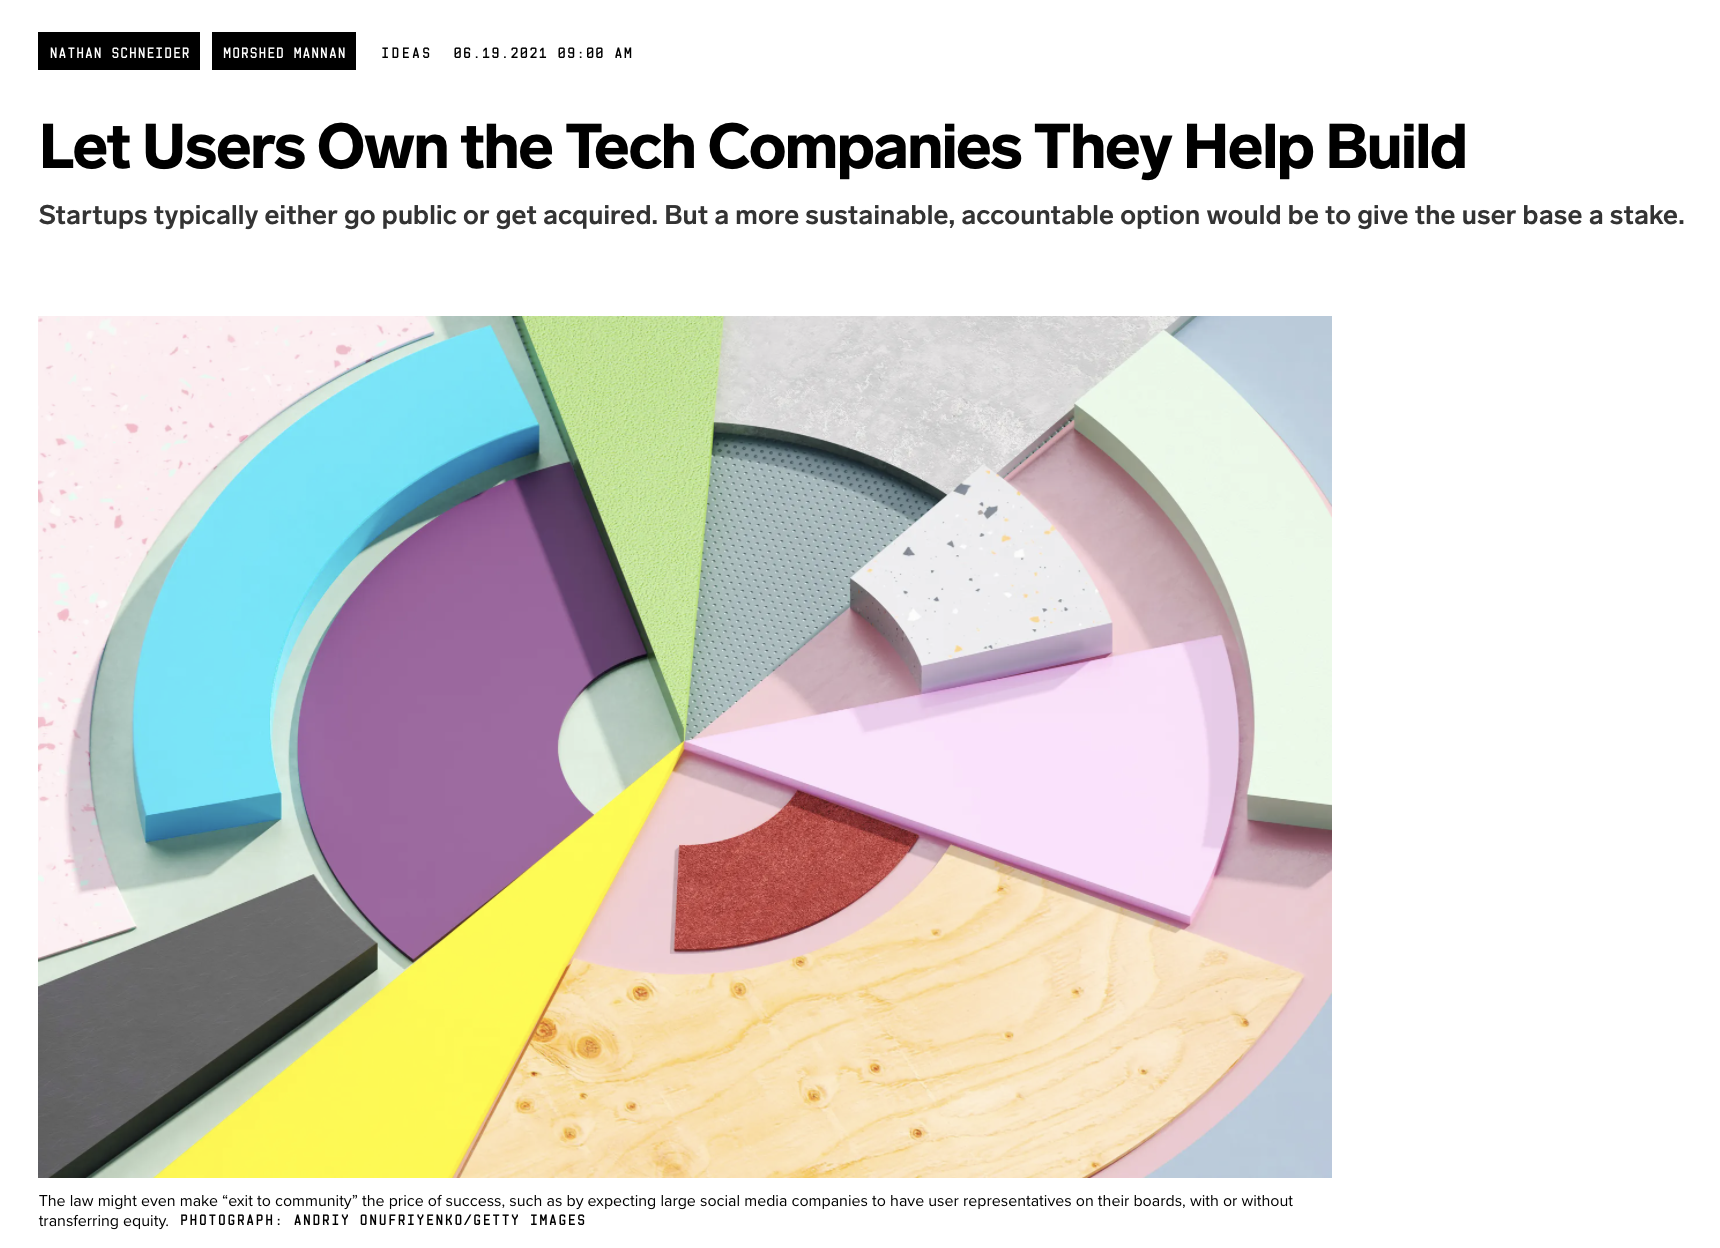 Let Users Own the Tech Companies They Help Build